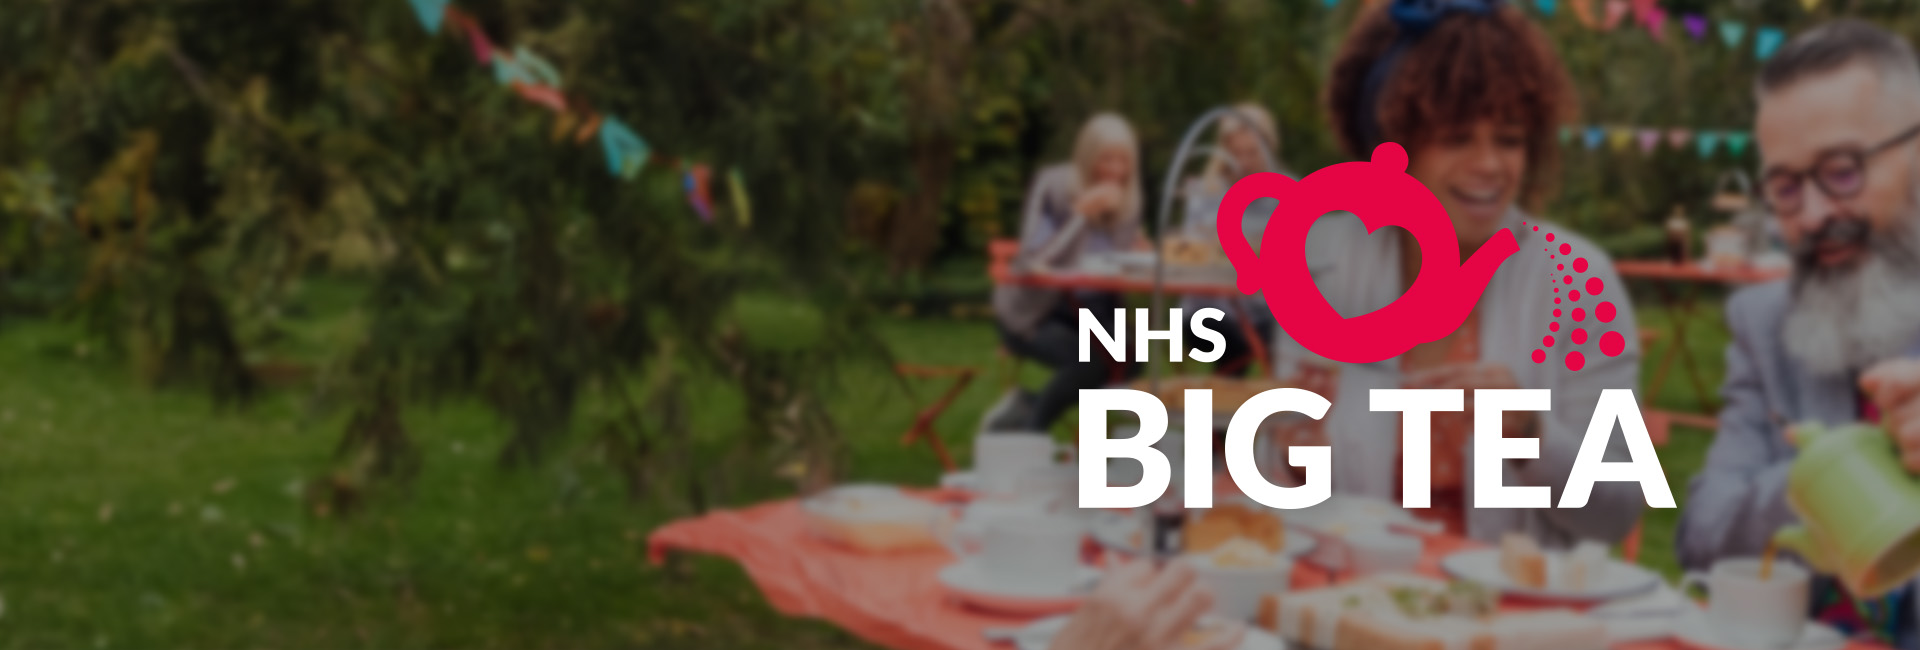 Celebrate the 75th birthday of the NHS by hosting a NHS Big Tea